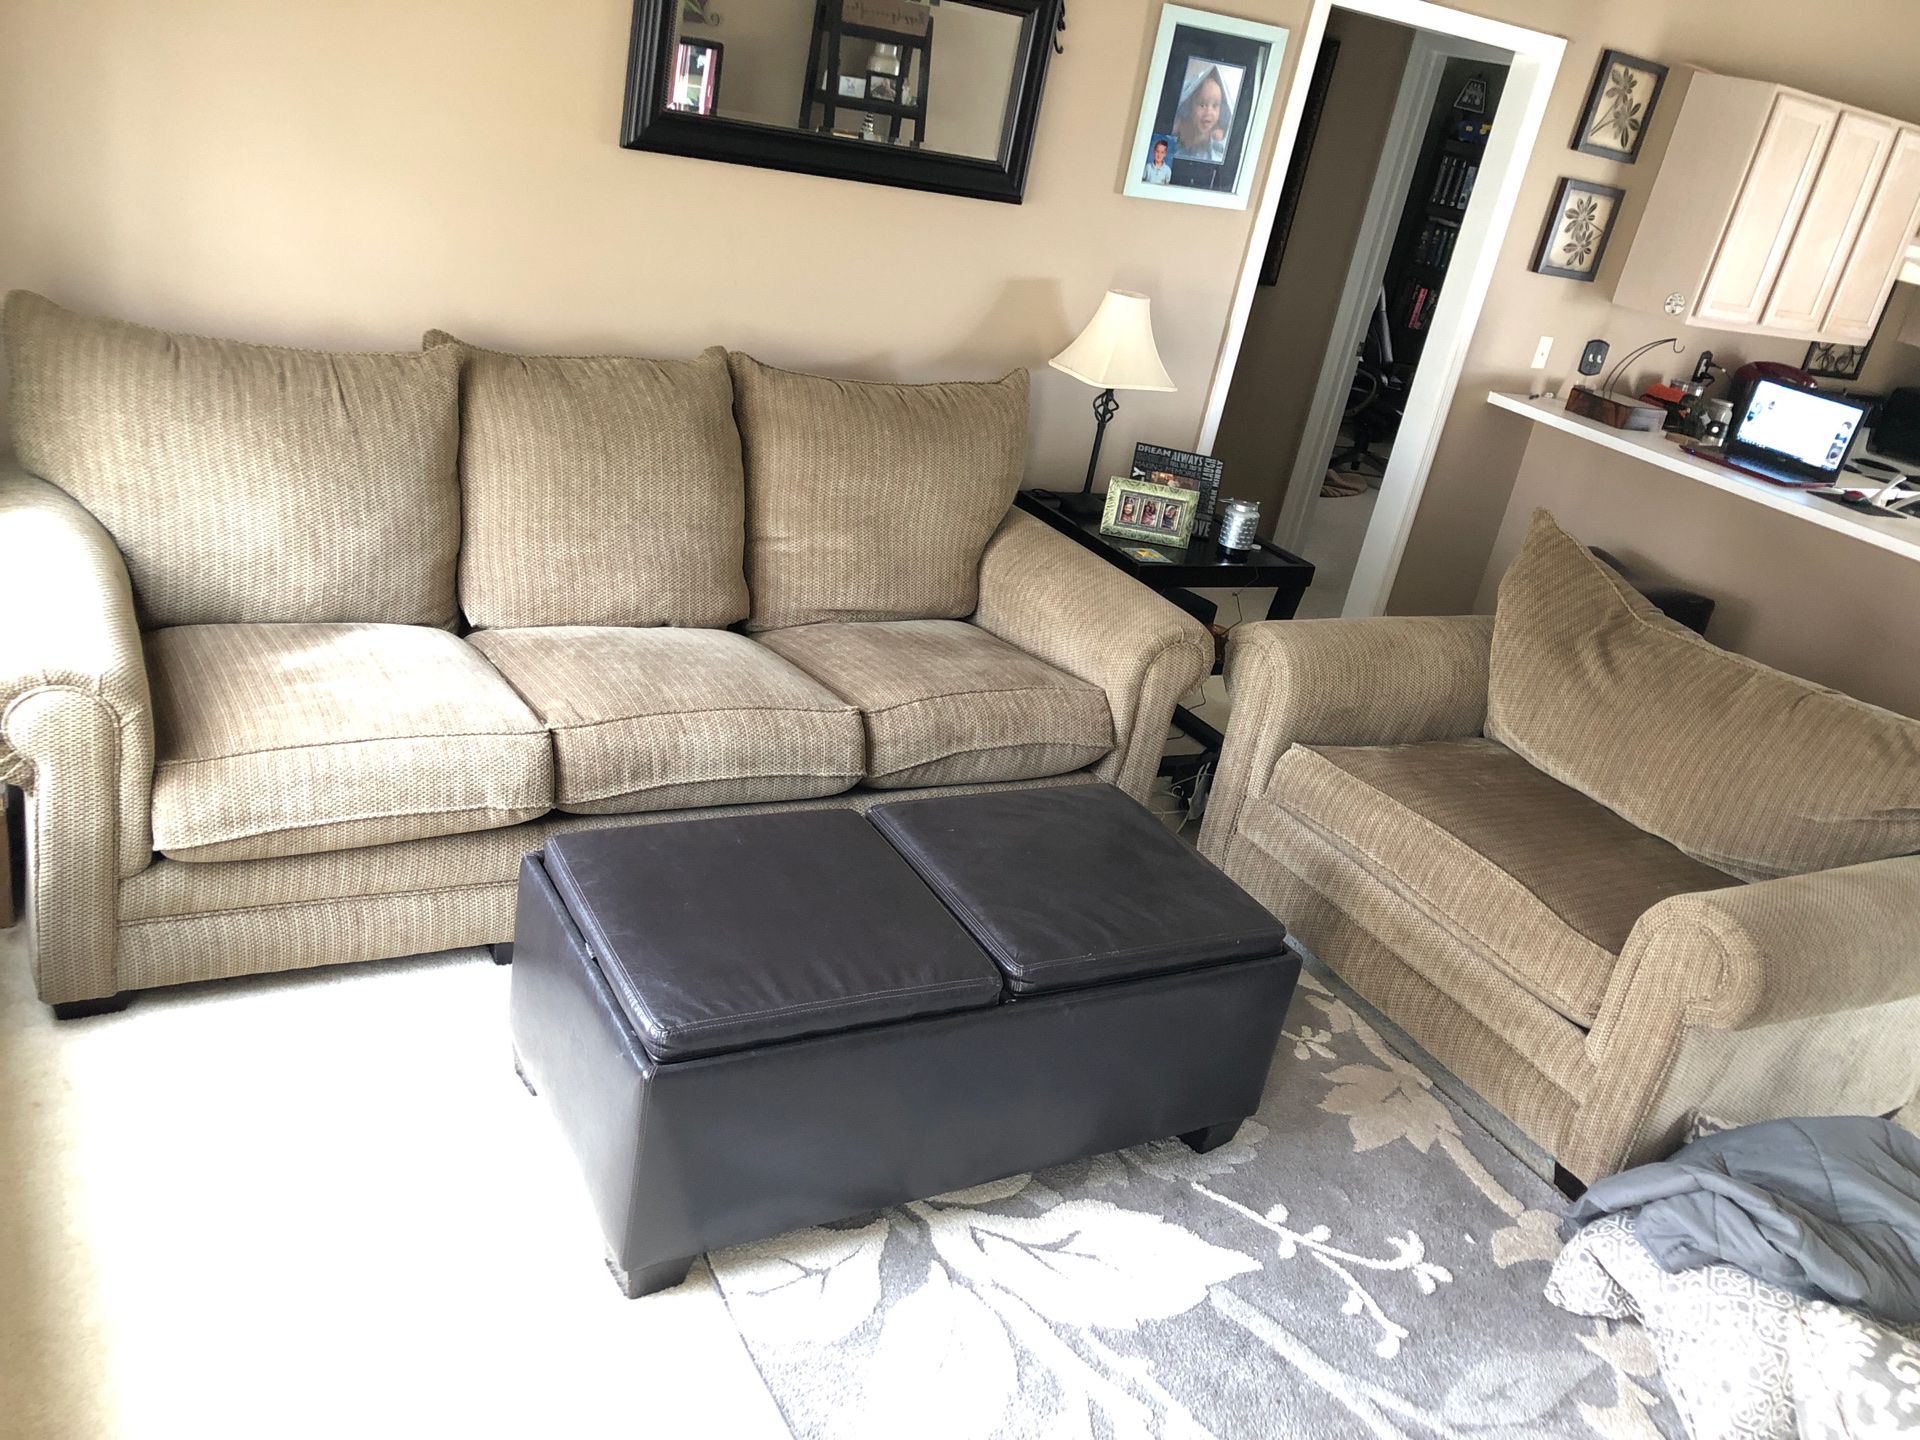 Couch, oversized chair, leather storage coffee table